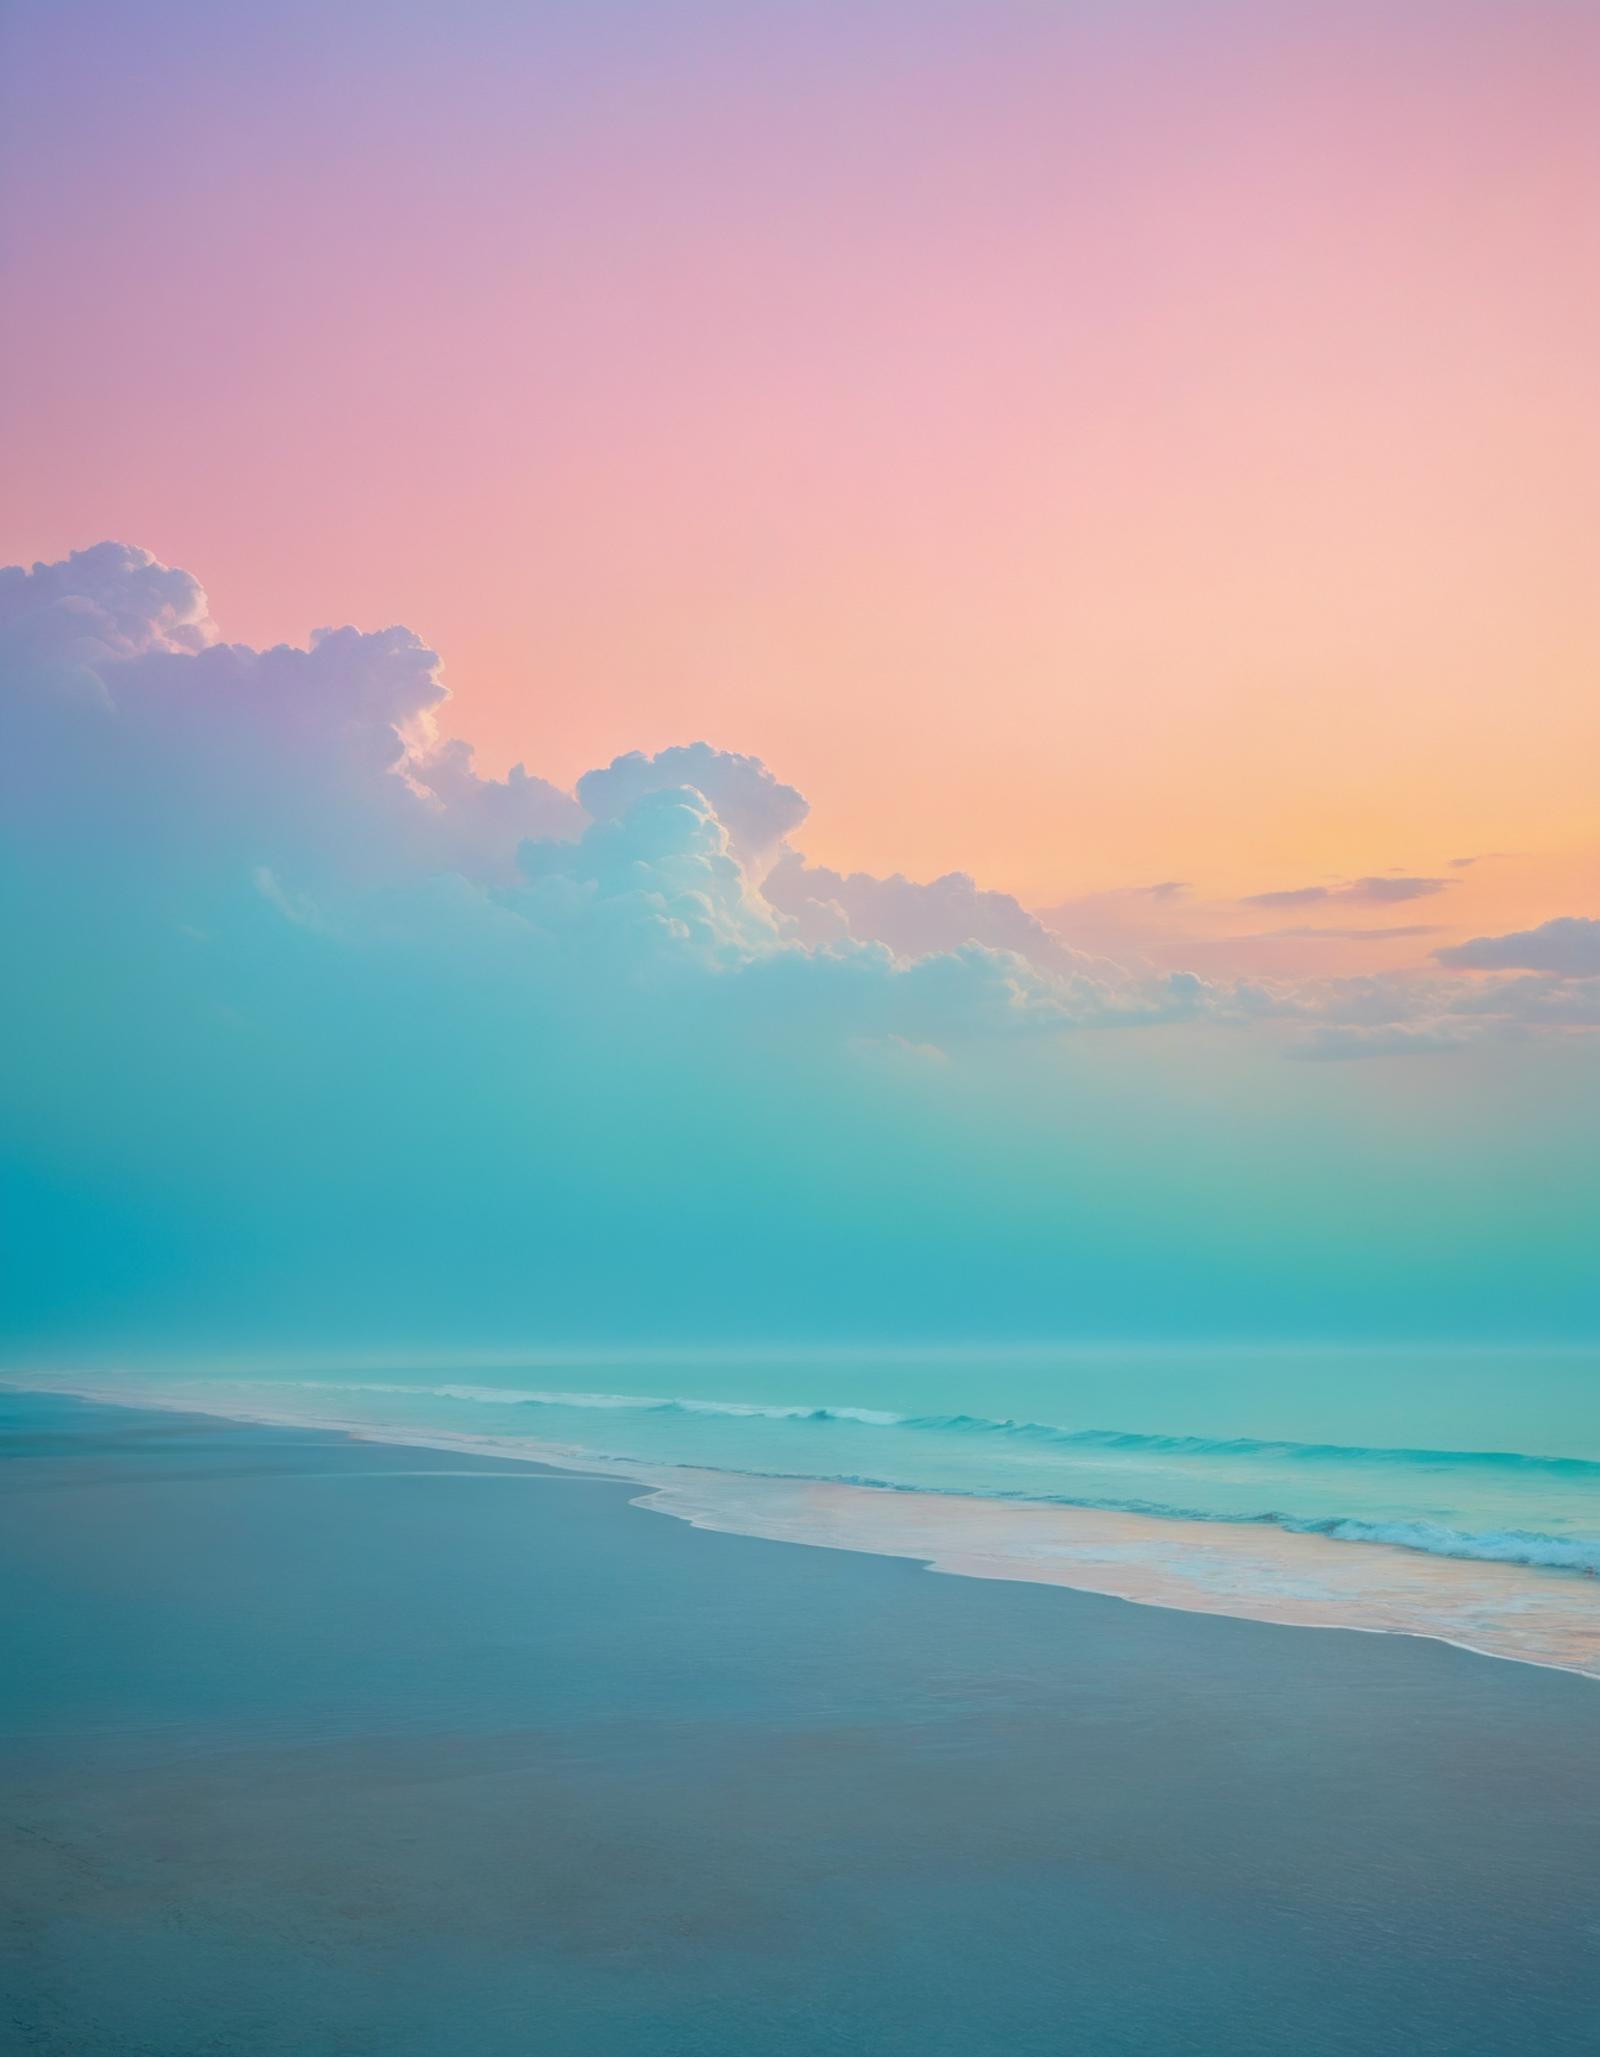 A picturesque beach scene with a pink and blue sky and waves.